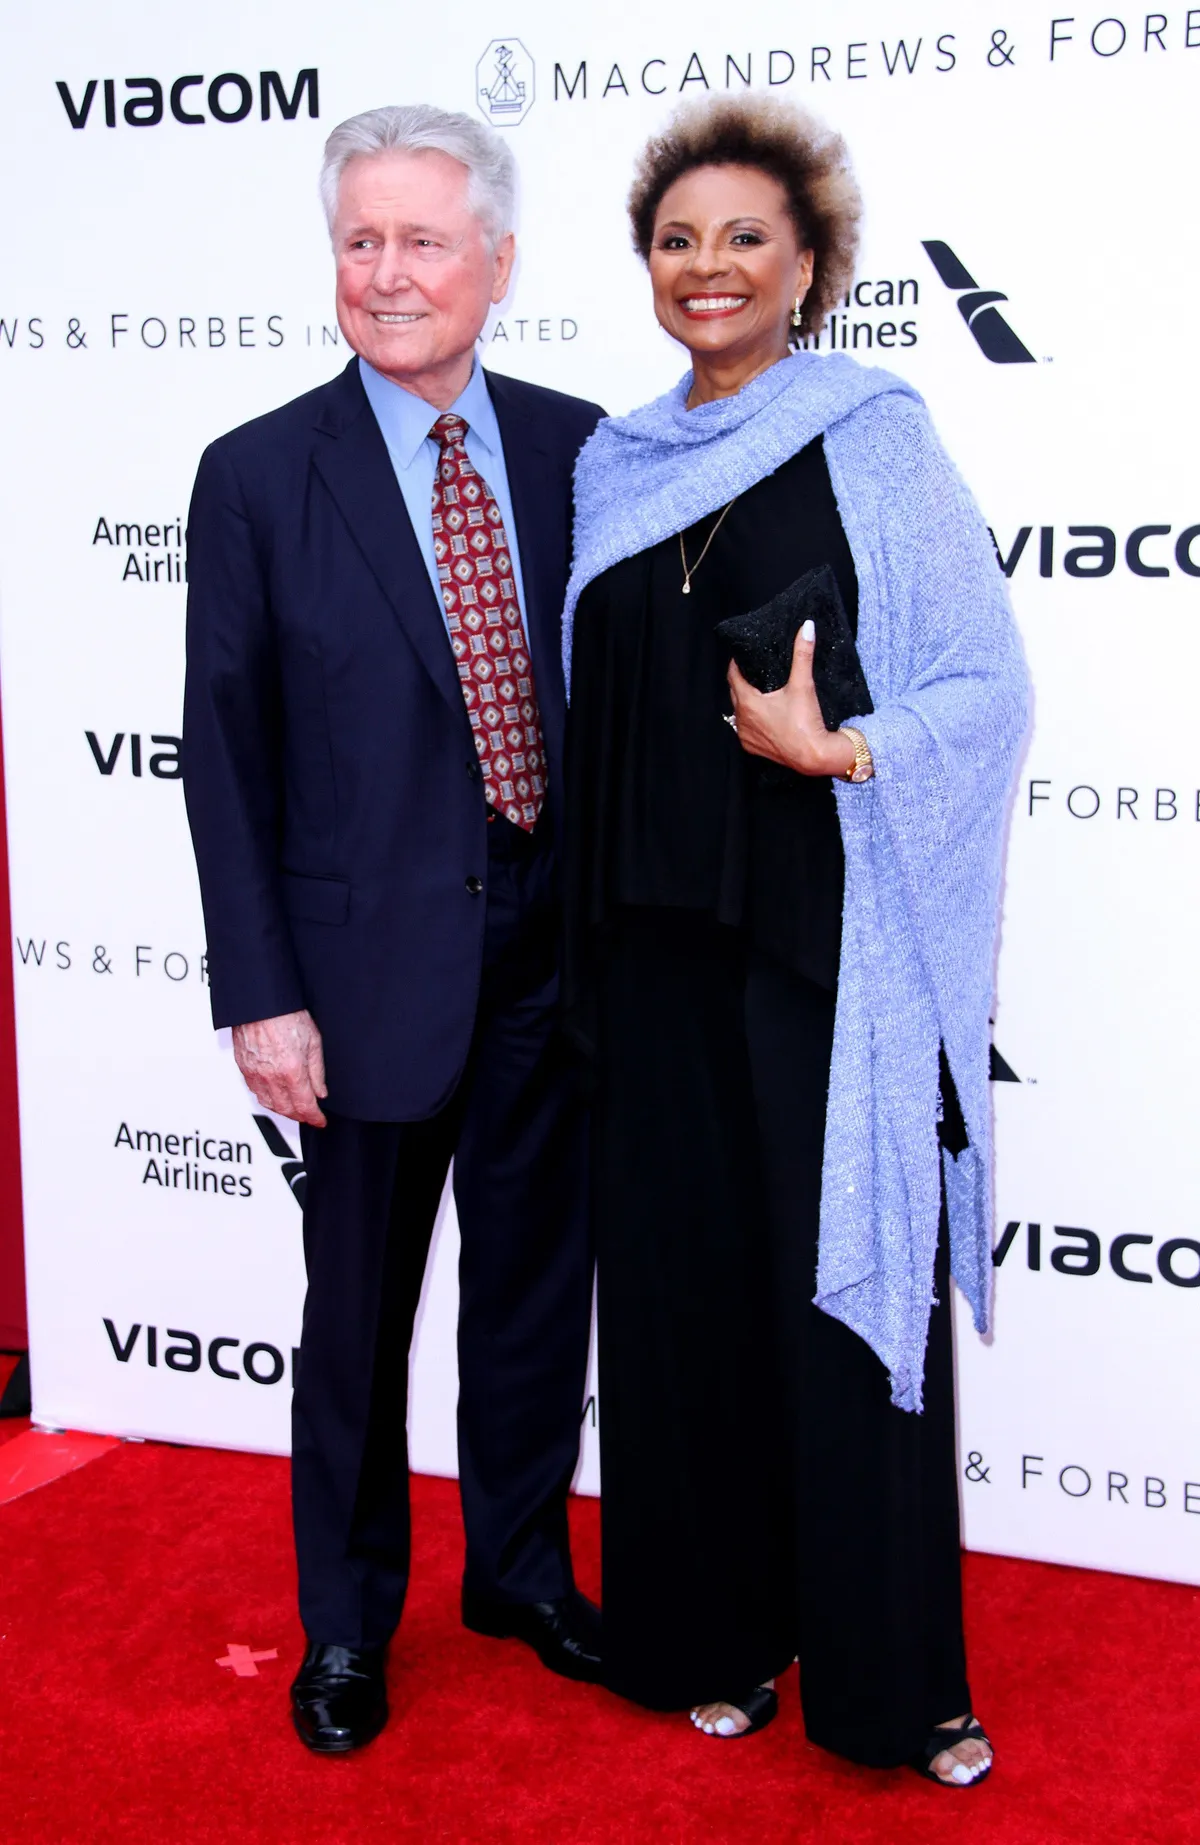 Leslie Uggams and Grahame Pratt attend a red carpet event in New York in 2015. | Source: Getty Images